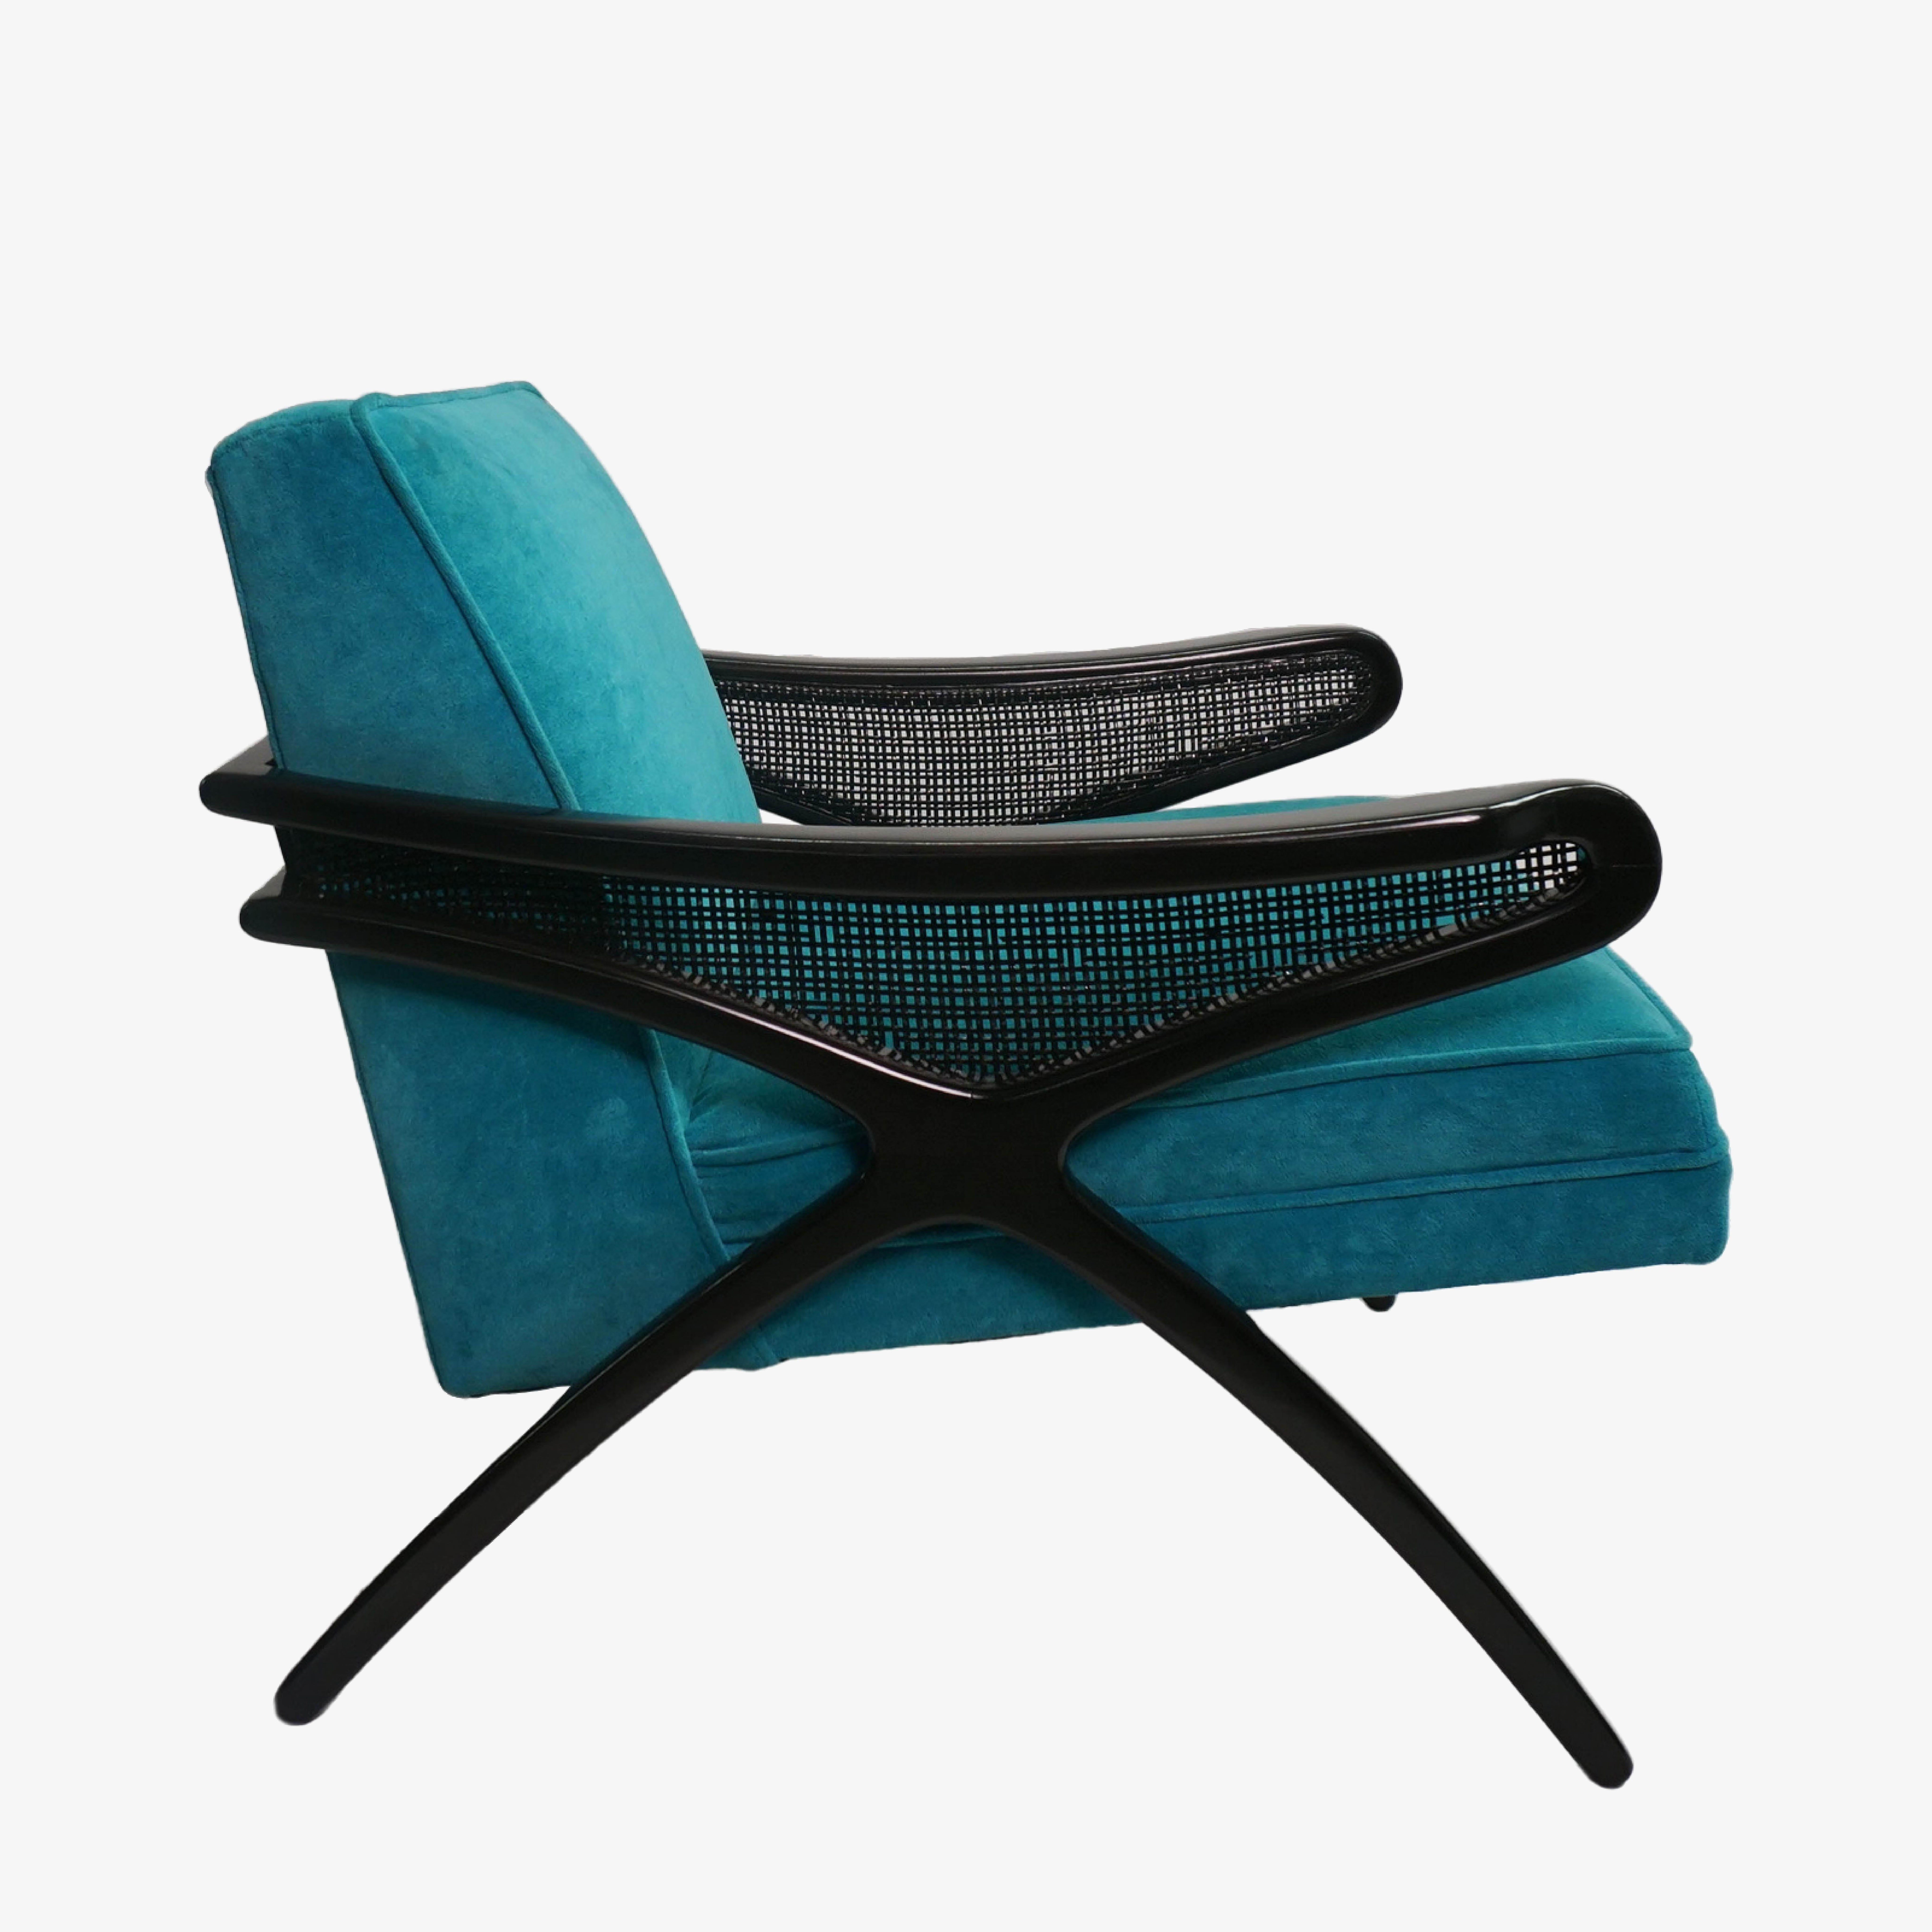 American Mid-Century Modern Butterfly Lounge Chair in Peacock Blue Velvet For Sale